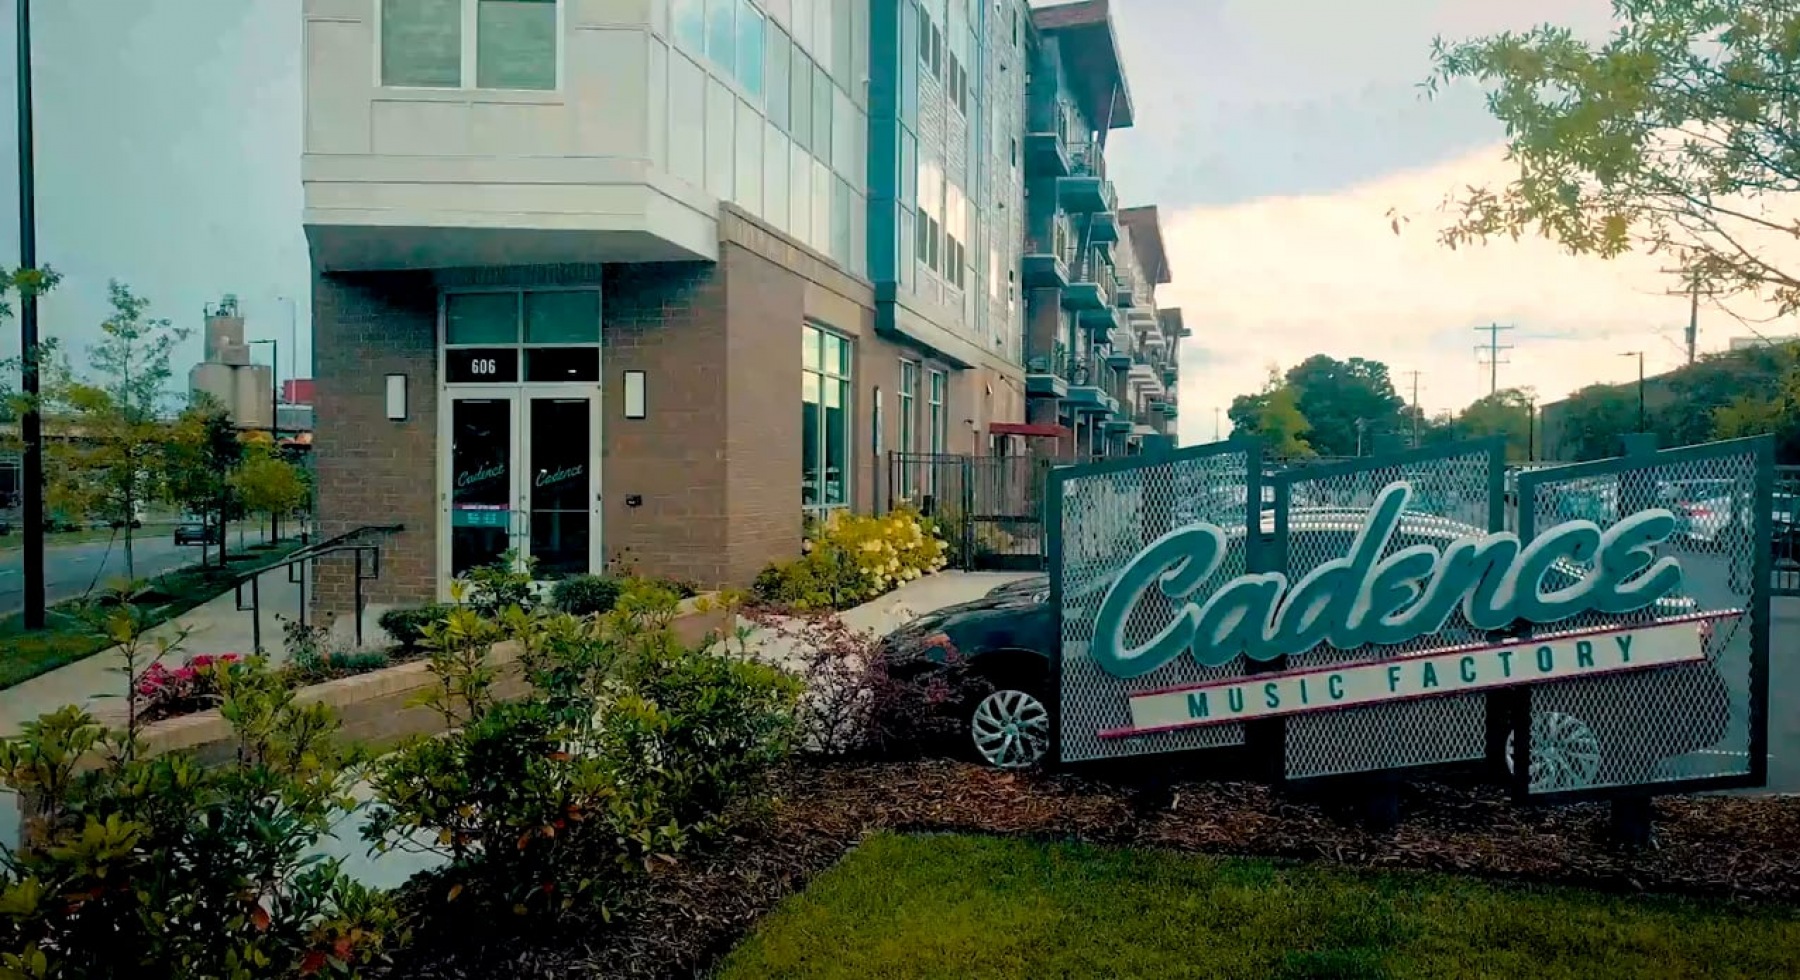 Cadence Music Factory Welcome Video